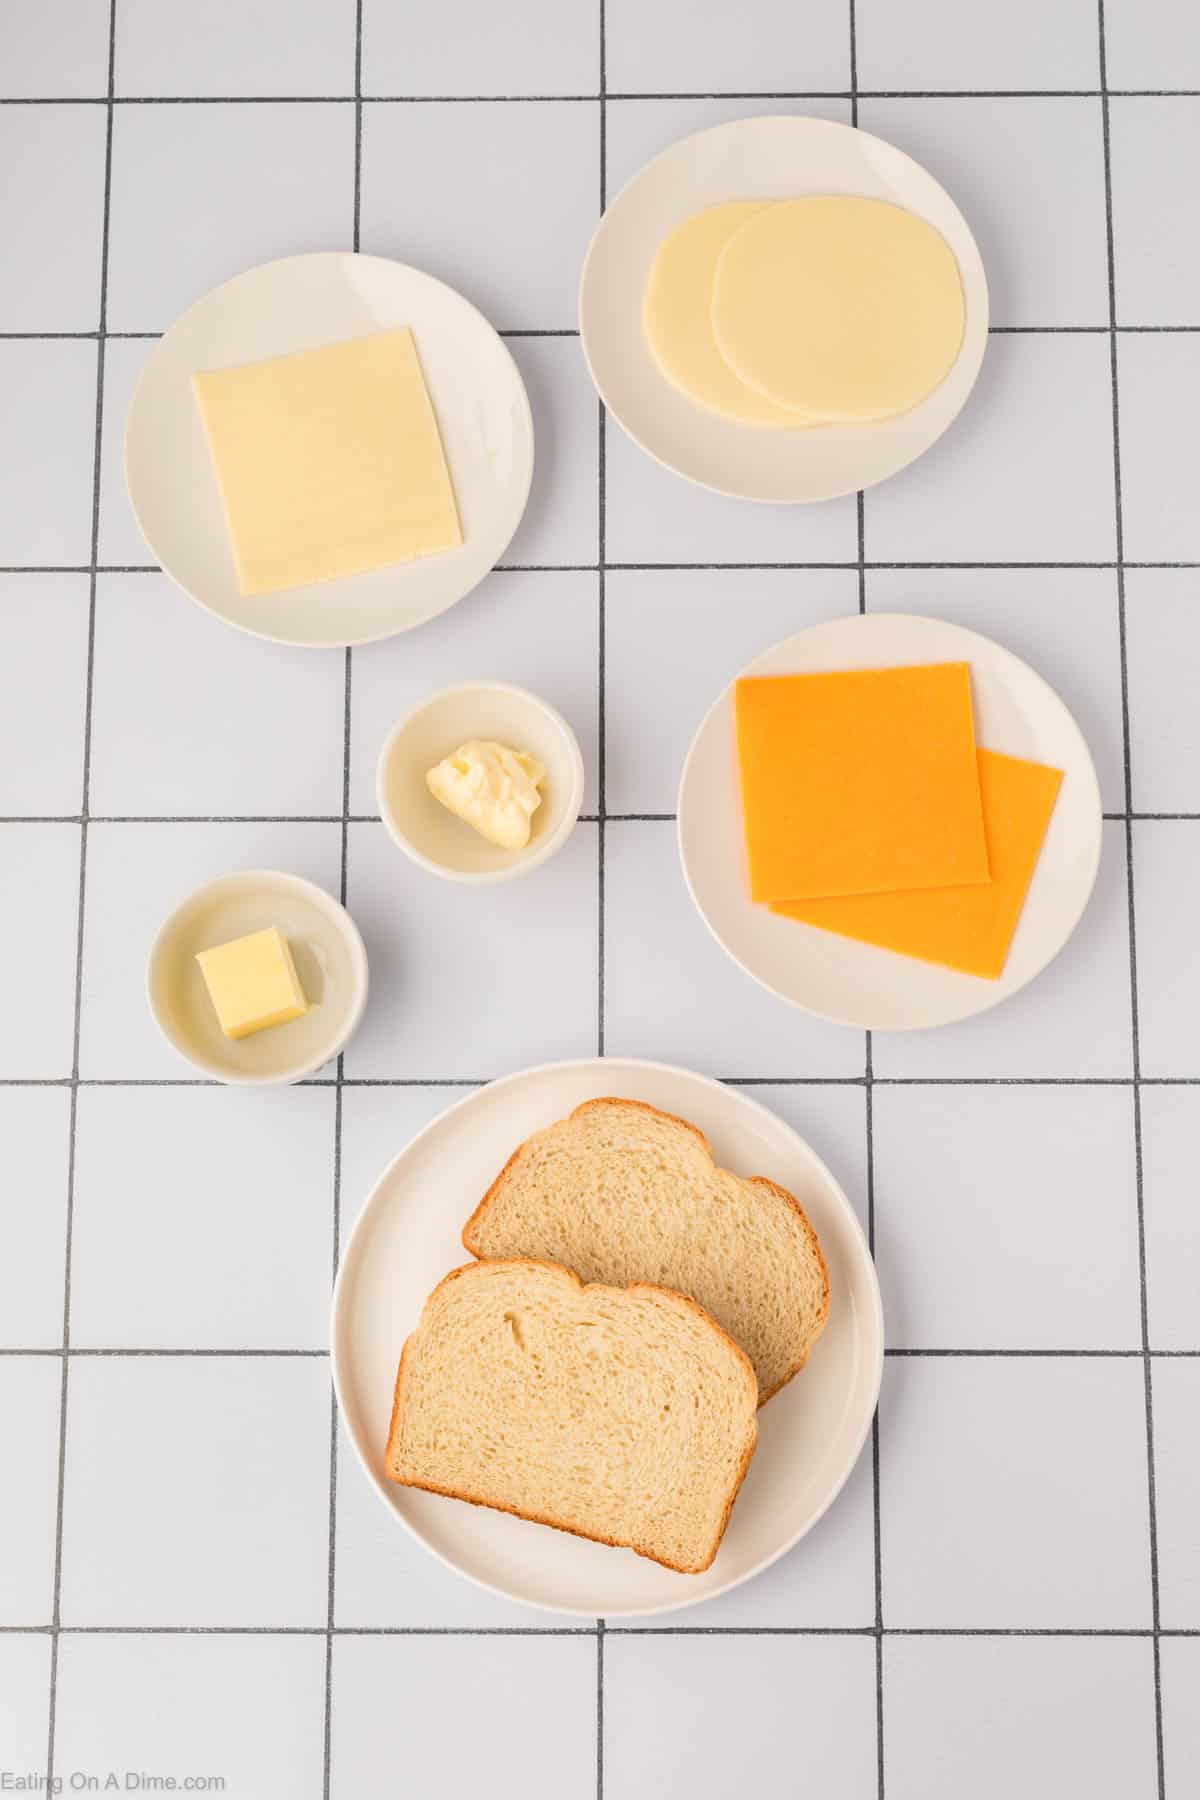 Grilled Cheese Sandwich ingredients - sourdough bread, butter, mayonnaise, cheddar cheese, provolone cheese, mozzarella cheese